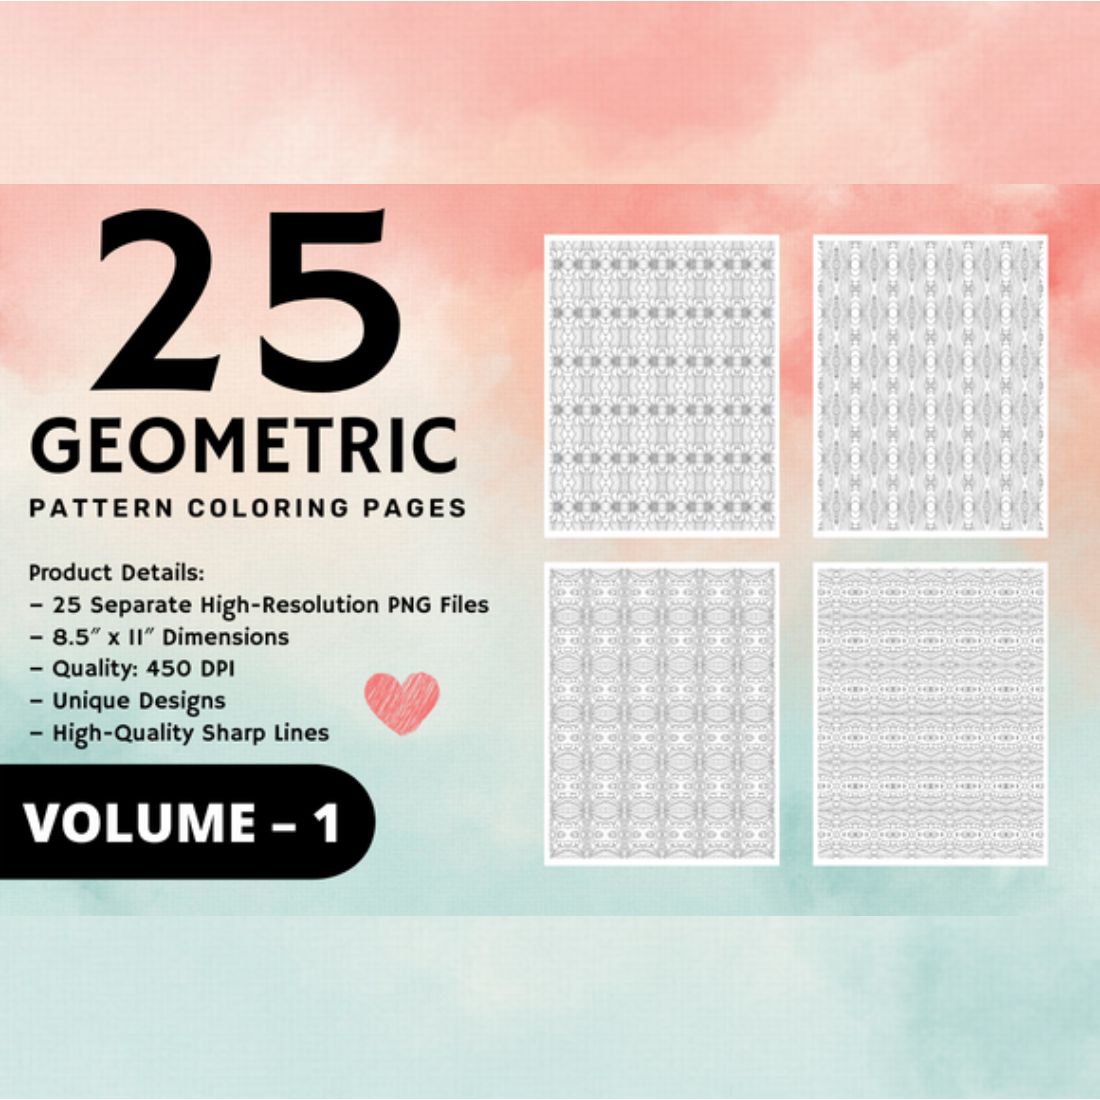 KDP Geometric pattern coloring pages Volume – 1 cover image.